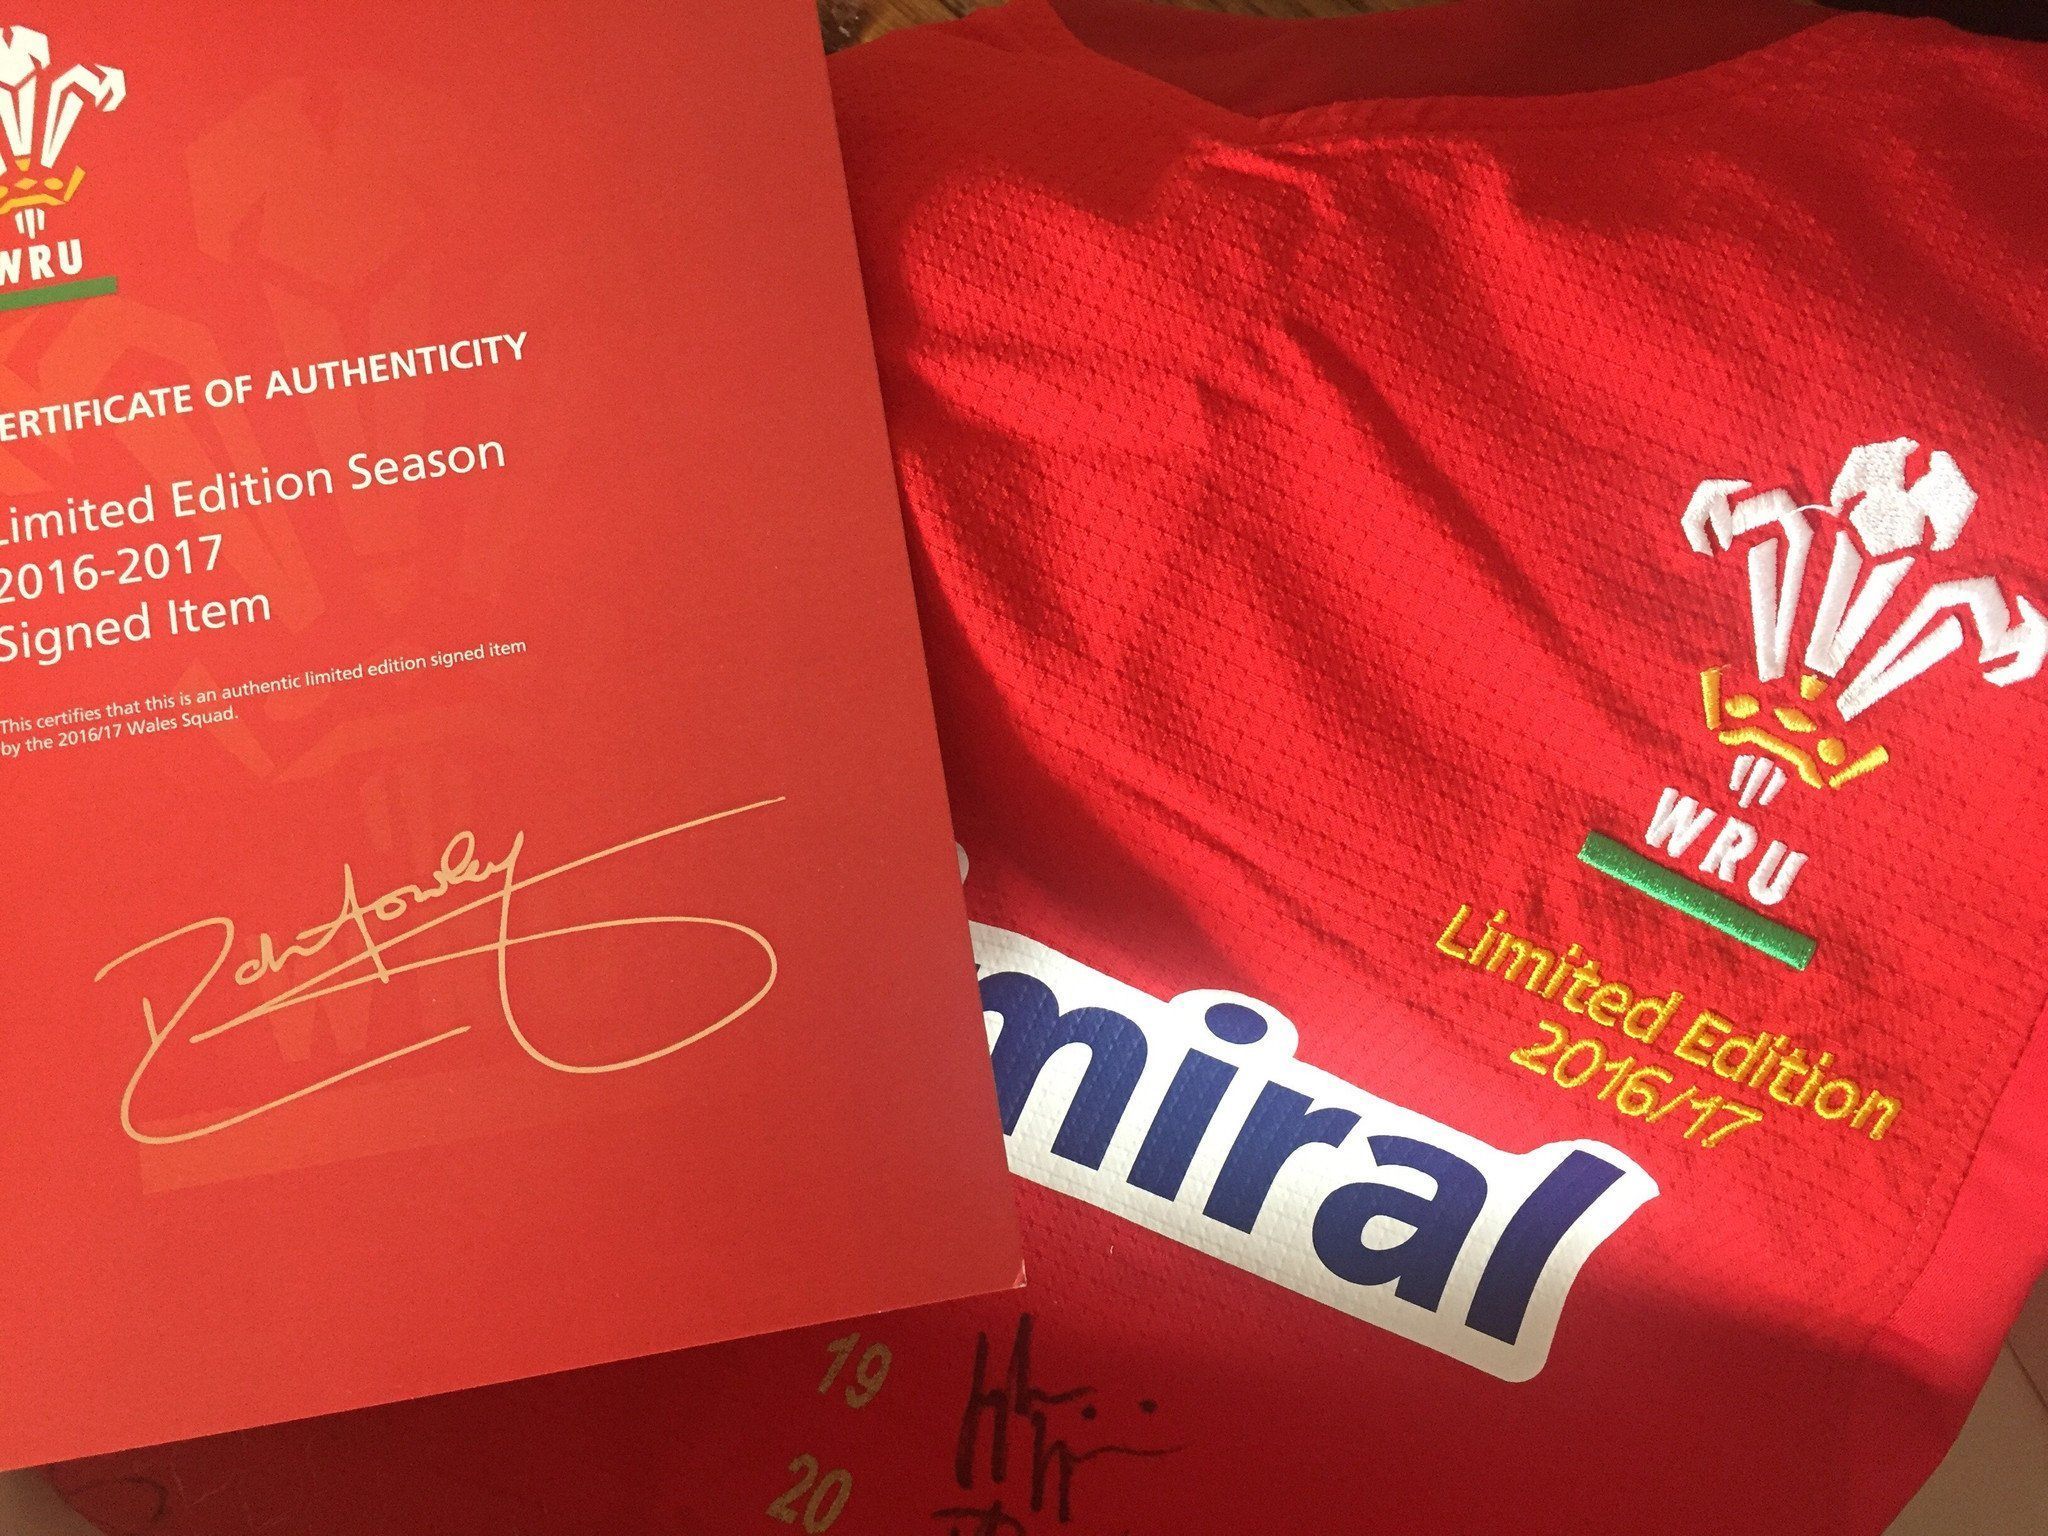 Win a shirt signed by the 36-man 2016-17 Welsh rugby union squad!